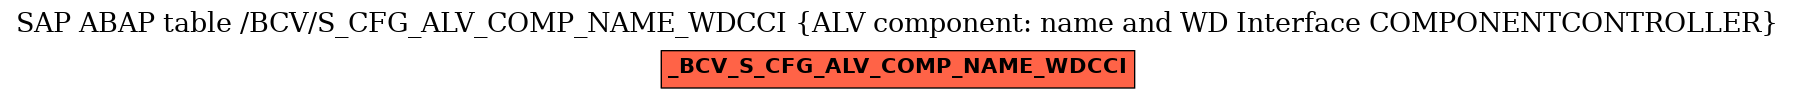 E-R Diagram for table /BCV/S_CFG_ALV_COMP_NAME_WDCCI (ALV component: name and WD Interface COMPONENTCONTROLLER)